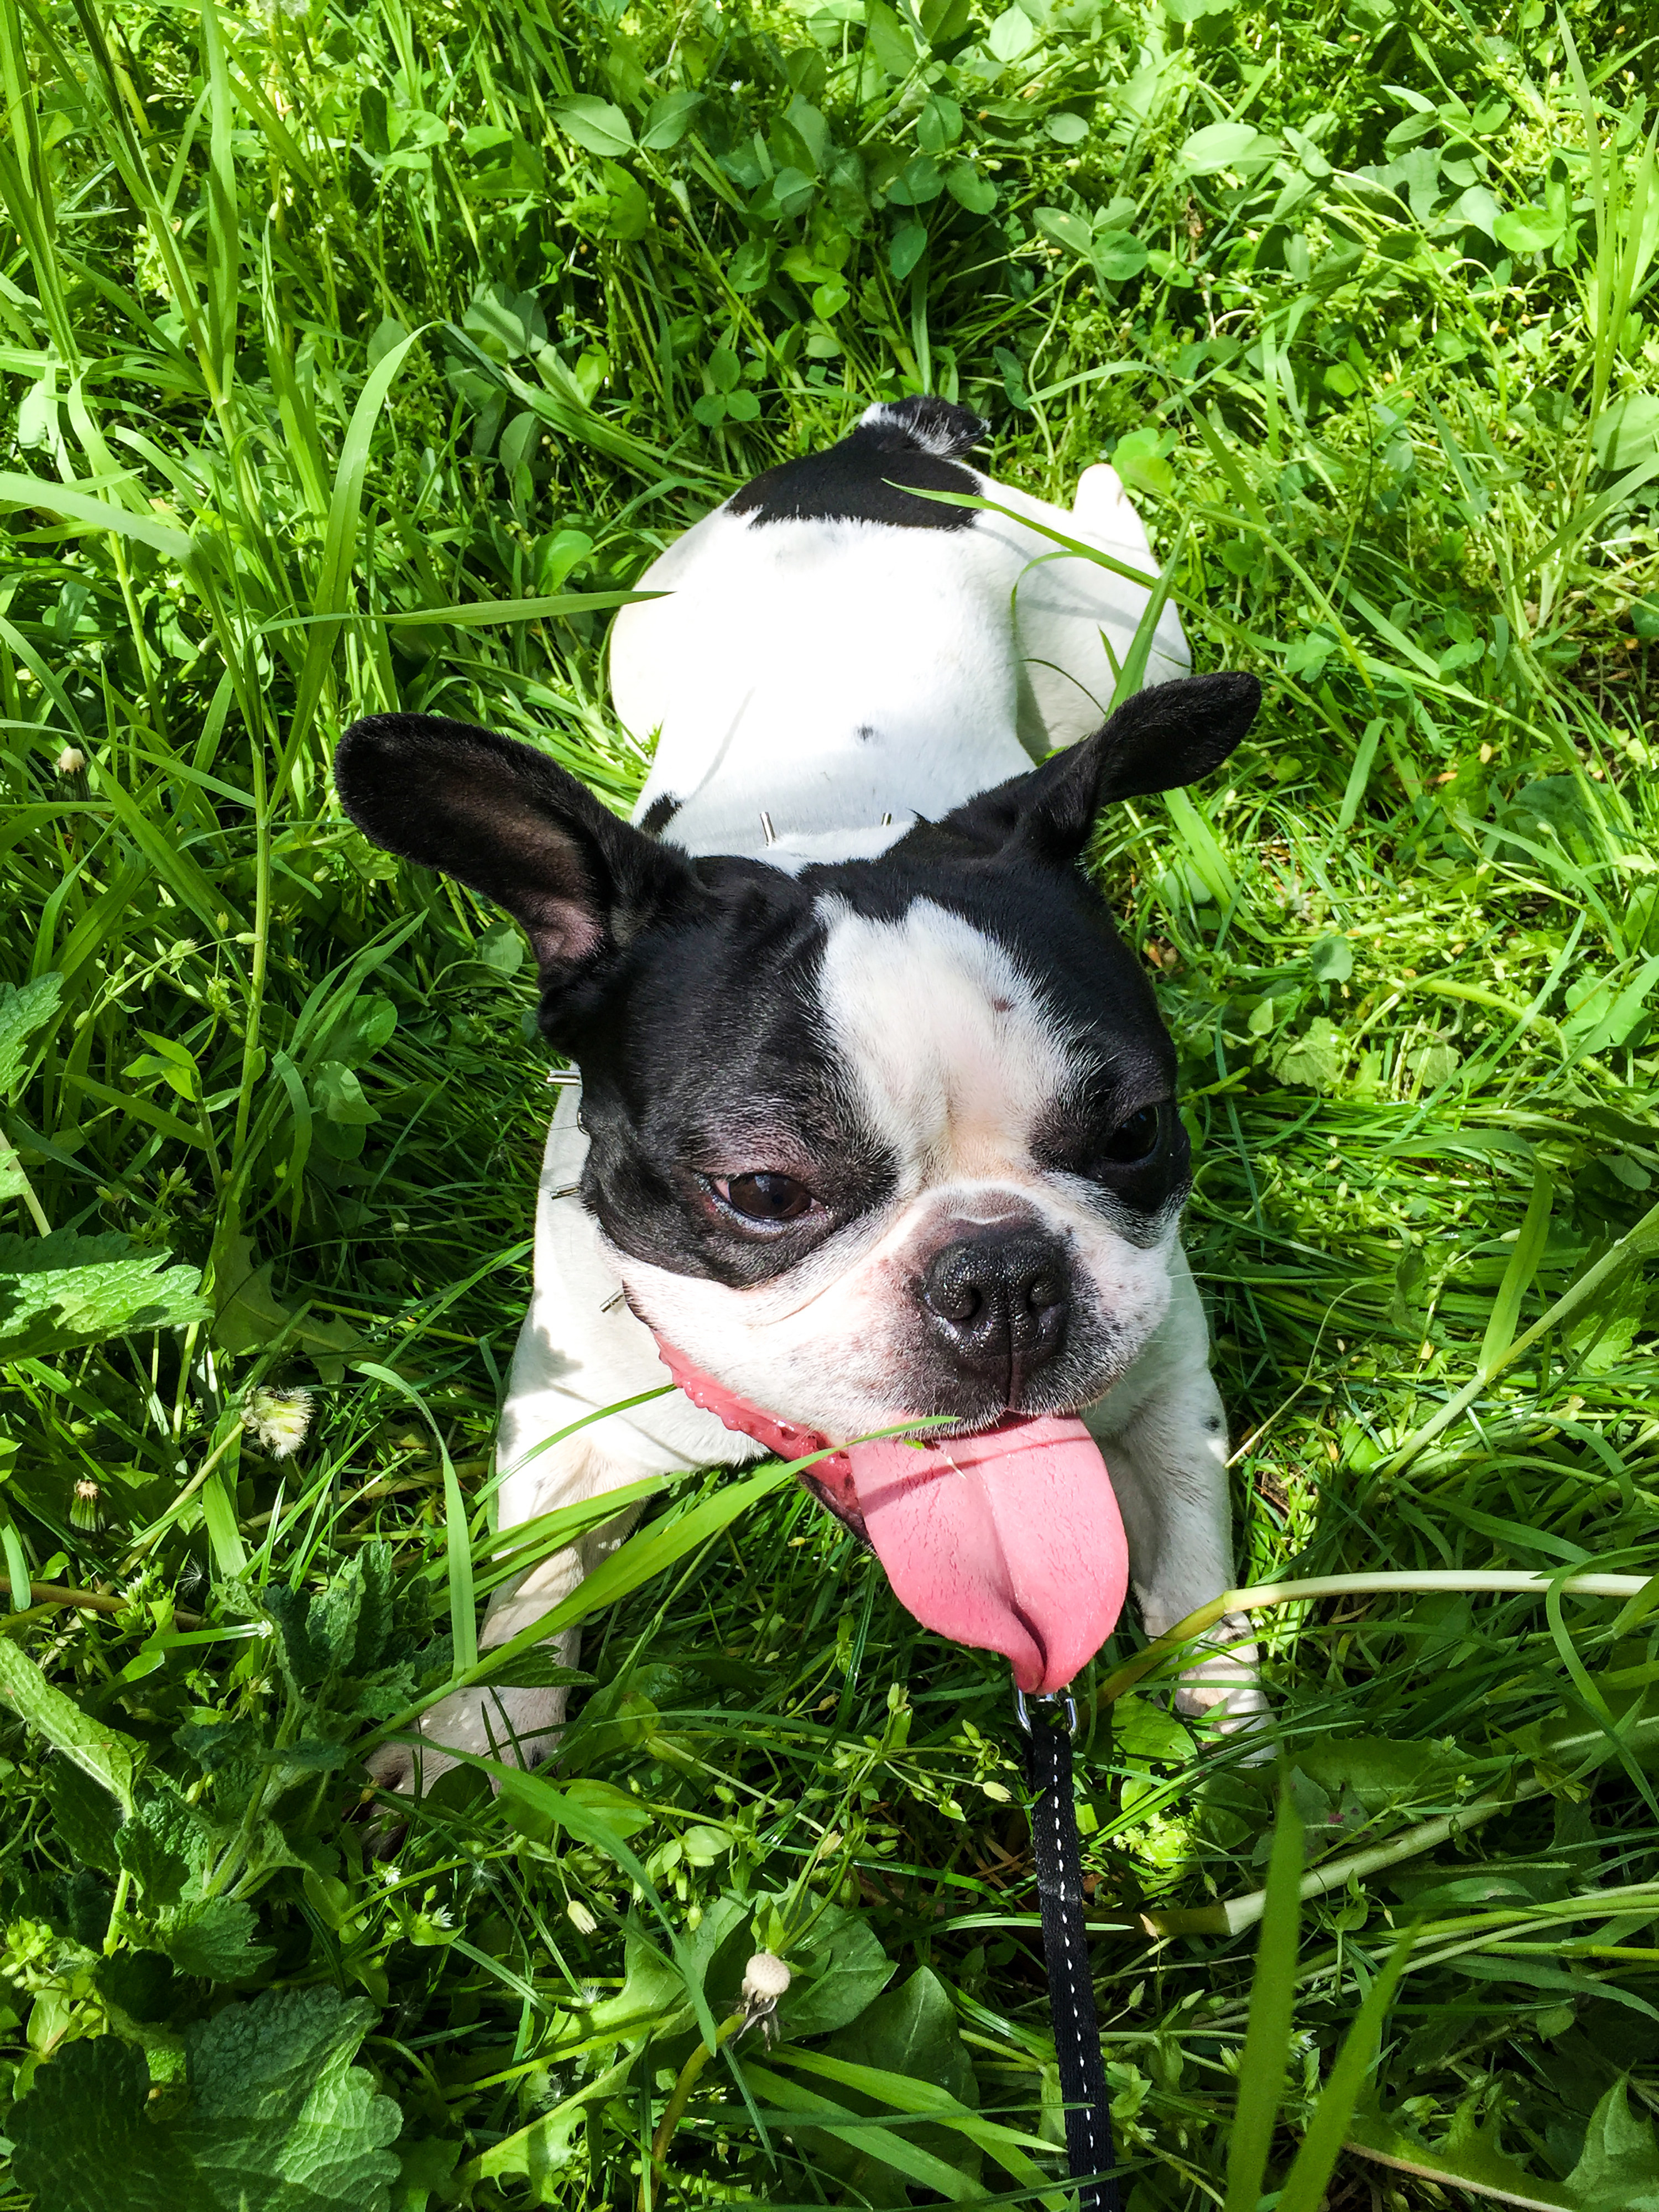 black and white puppy in grass with tongue out